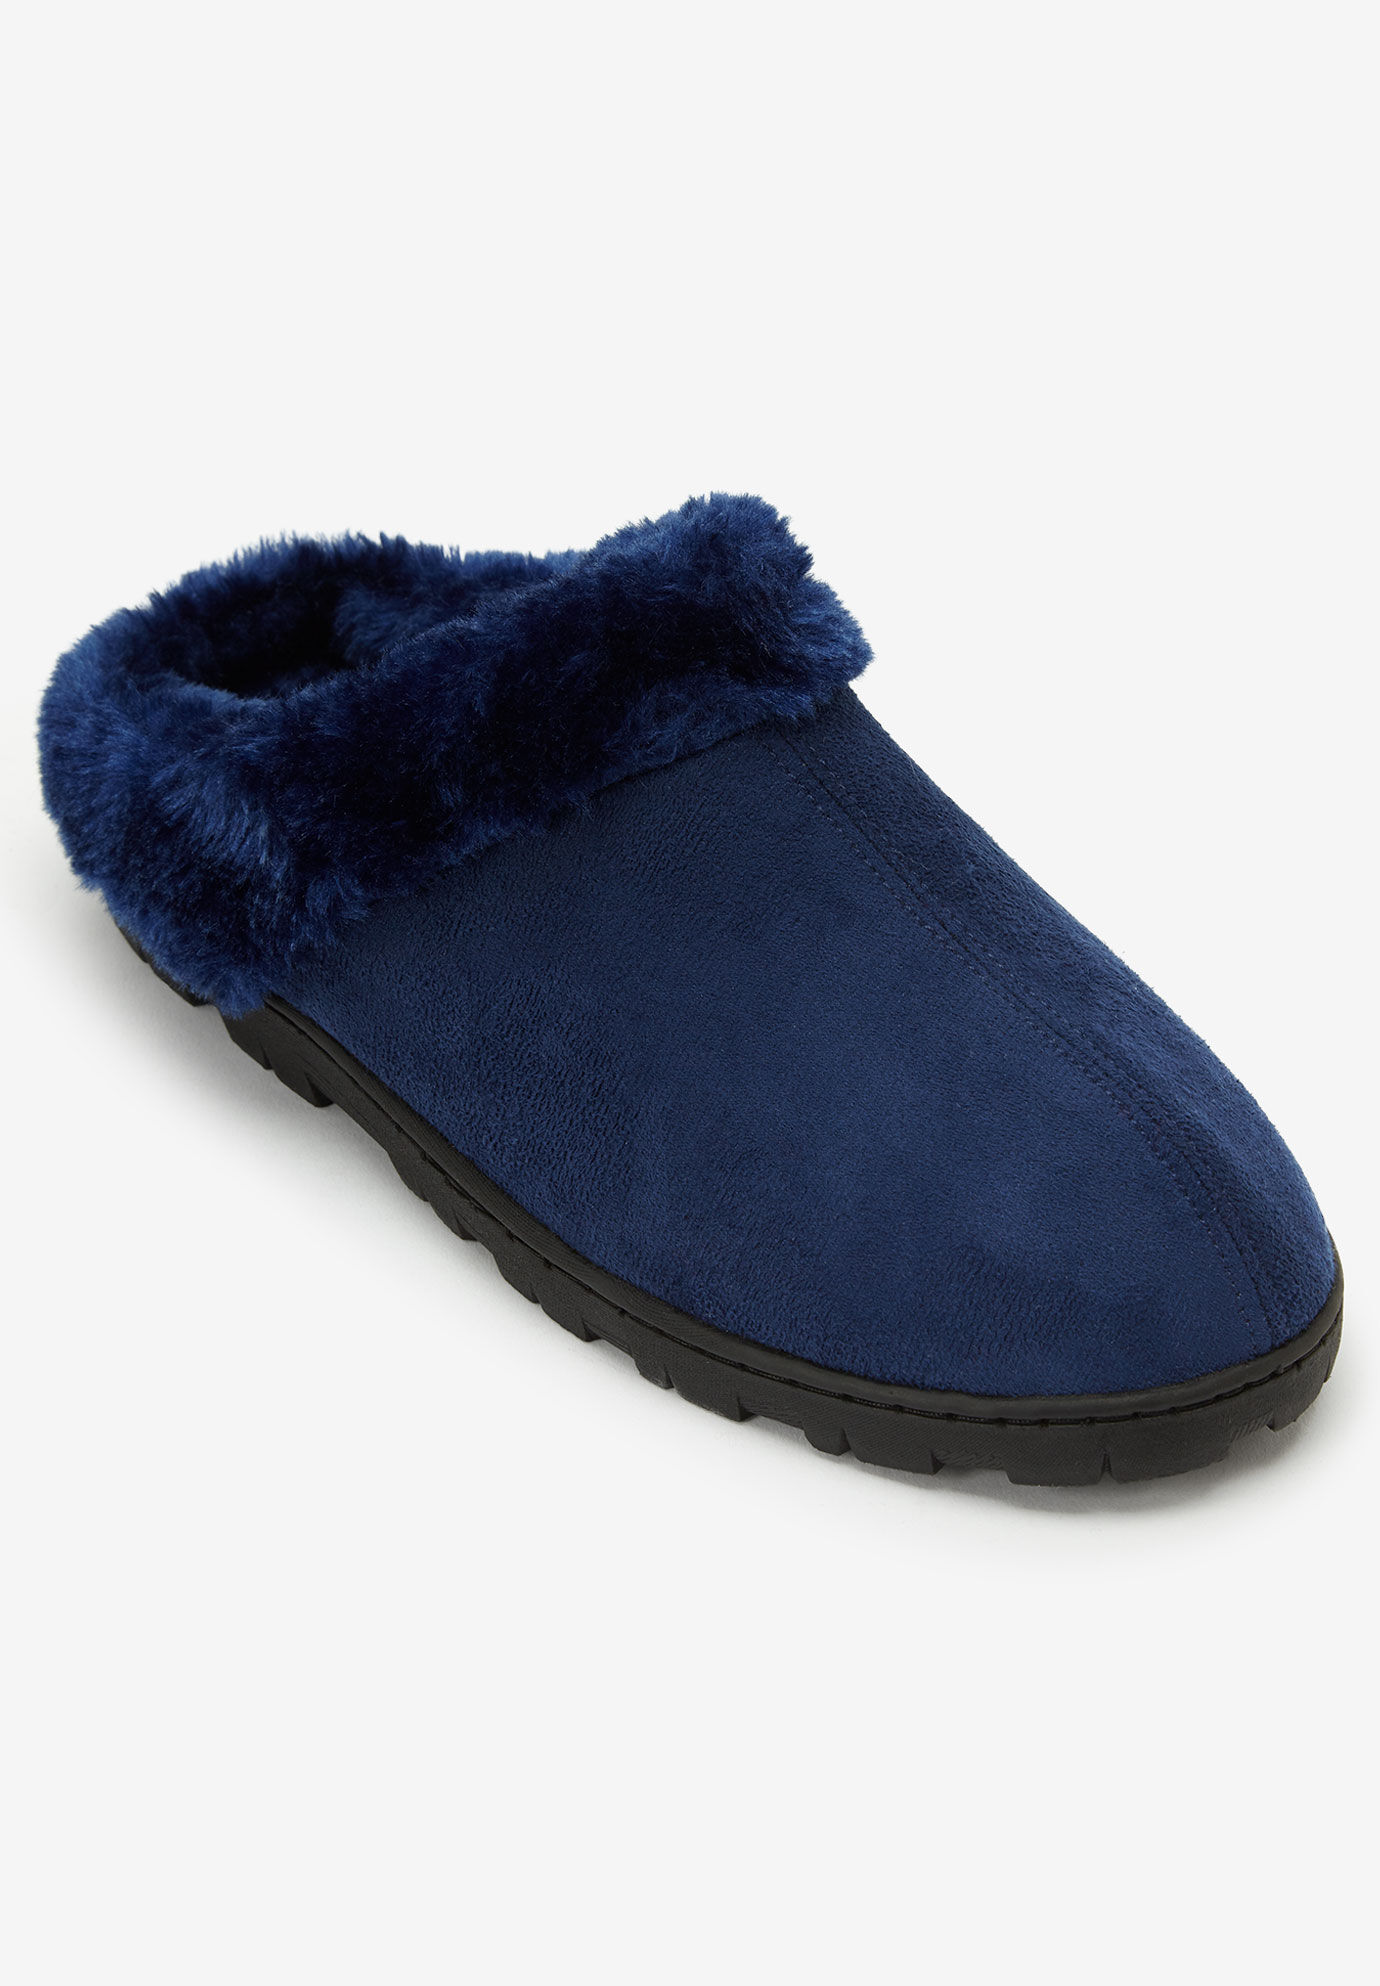 extra wide slippers for ladies